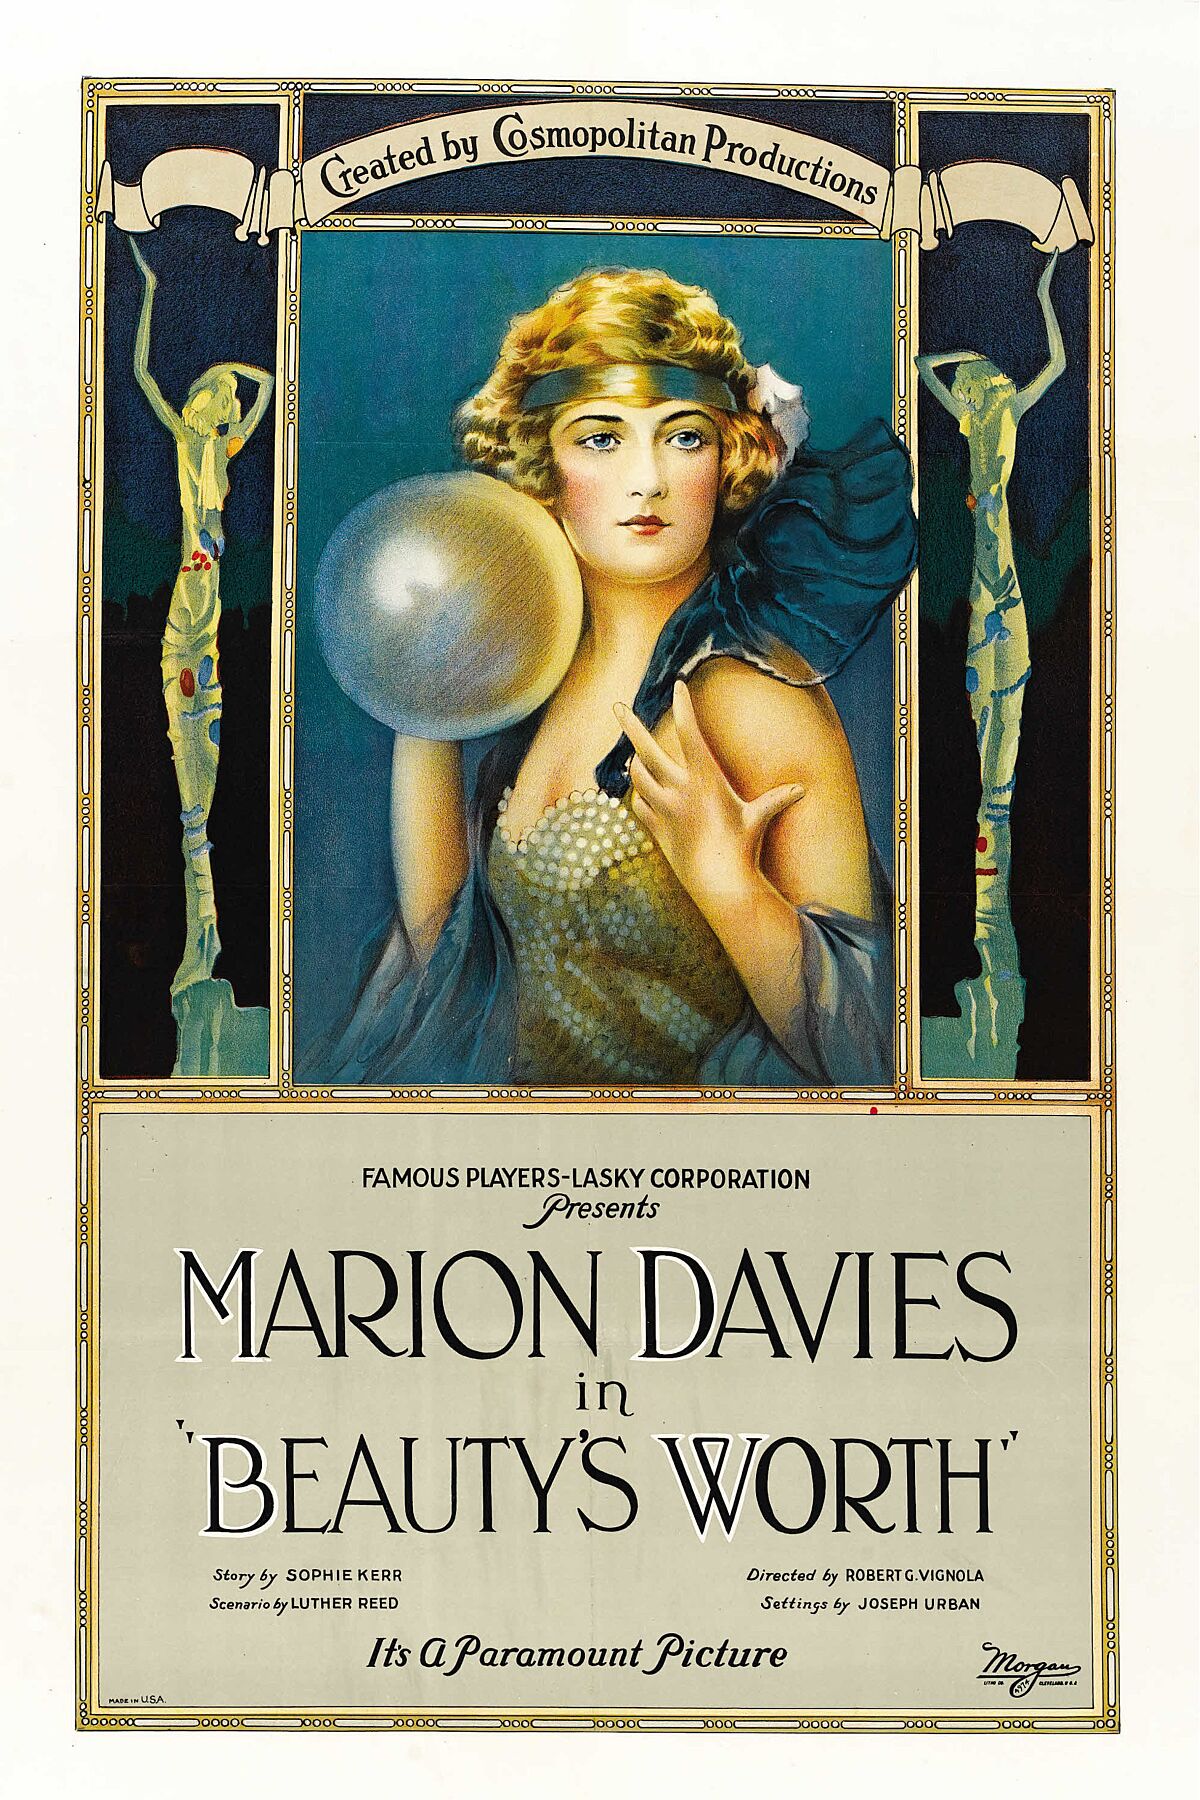 Beauty's Worth is a 1922 American romantic comedy drama film directed by Robert G. Vignola